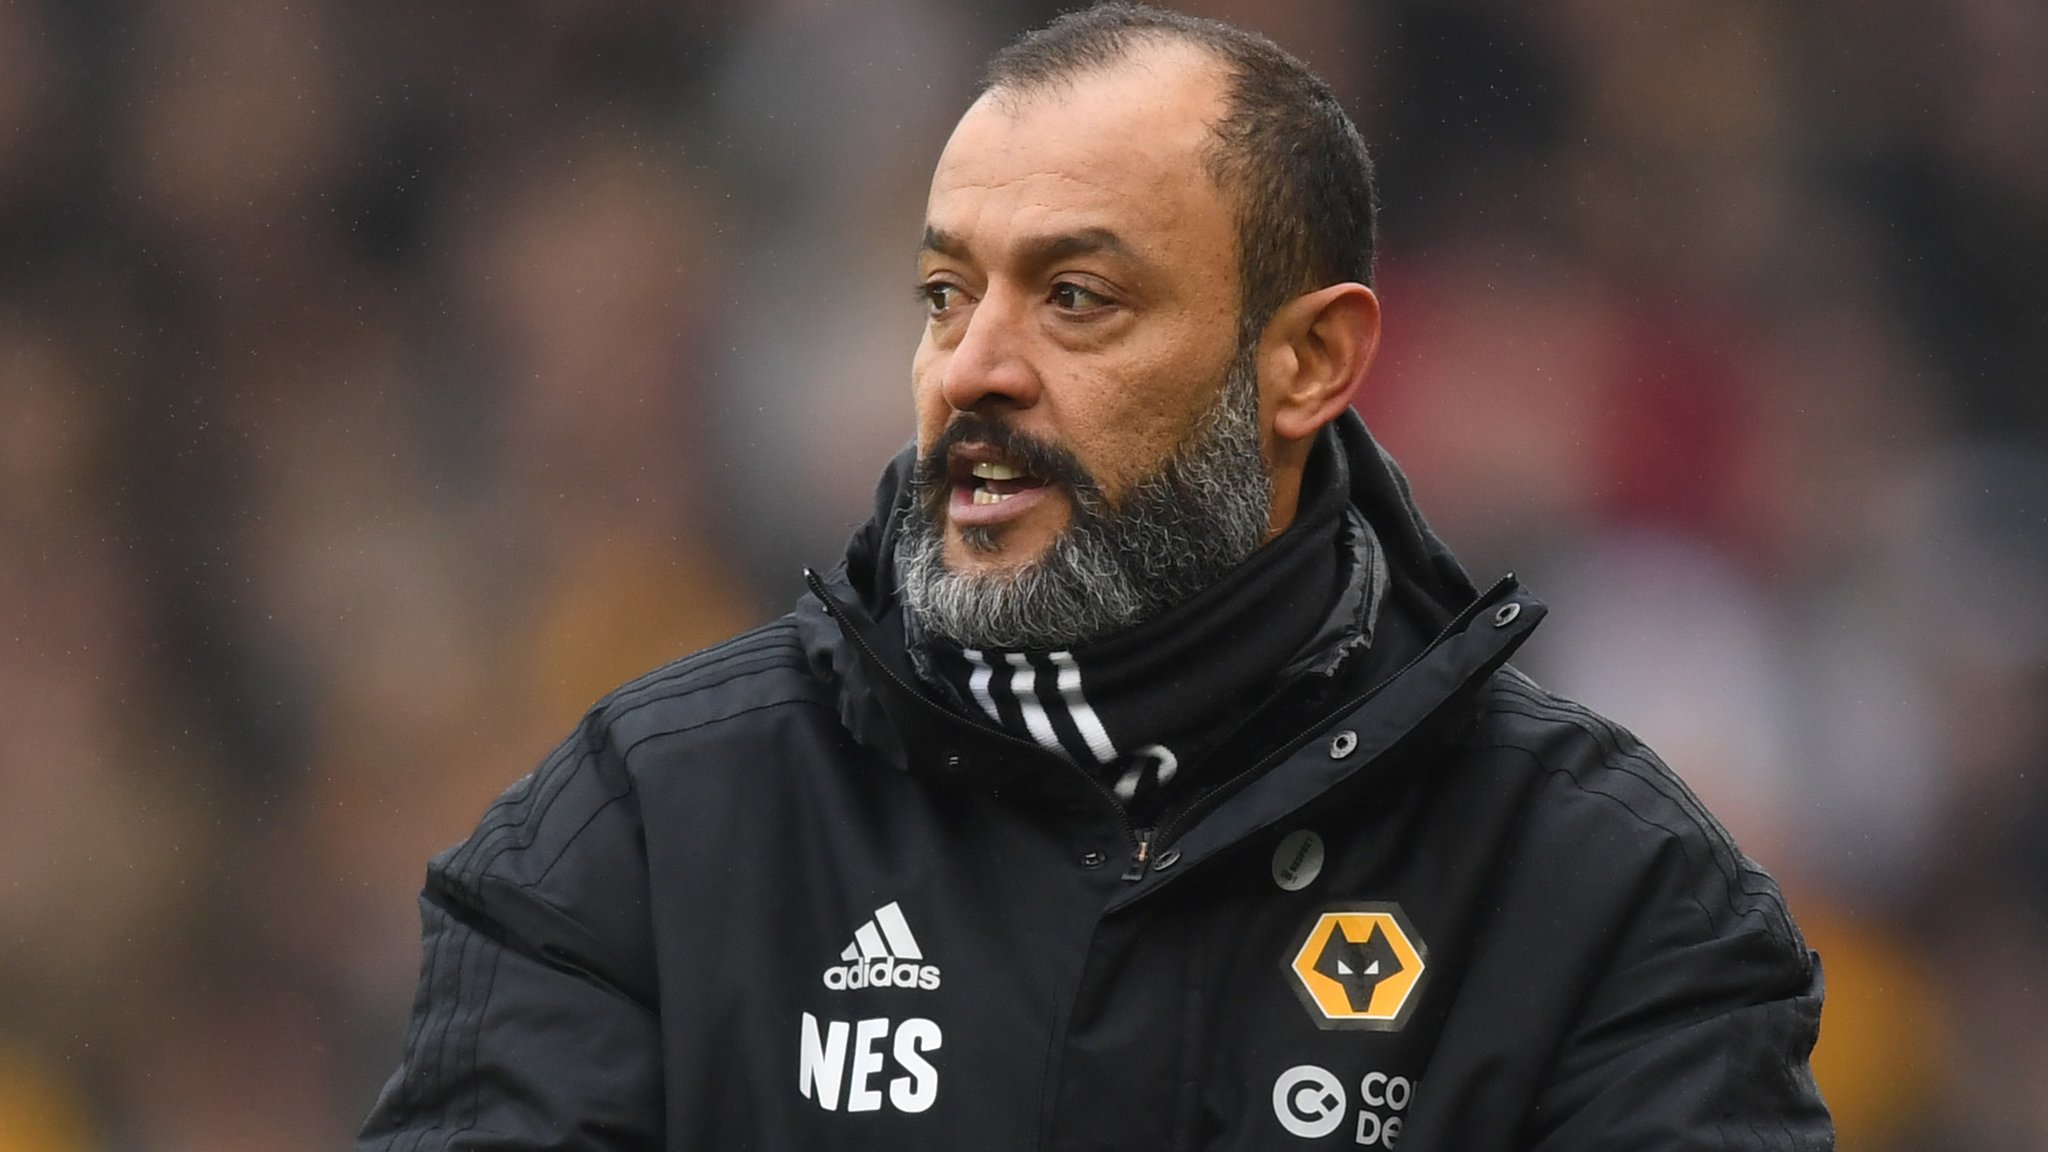 Wolves boss Nuno Espirito Santo Takes FA Nice for running on to pitch